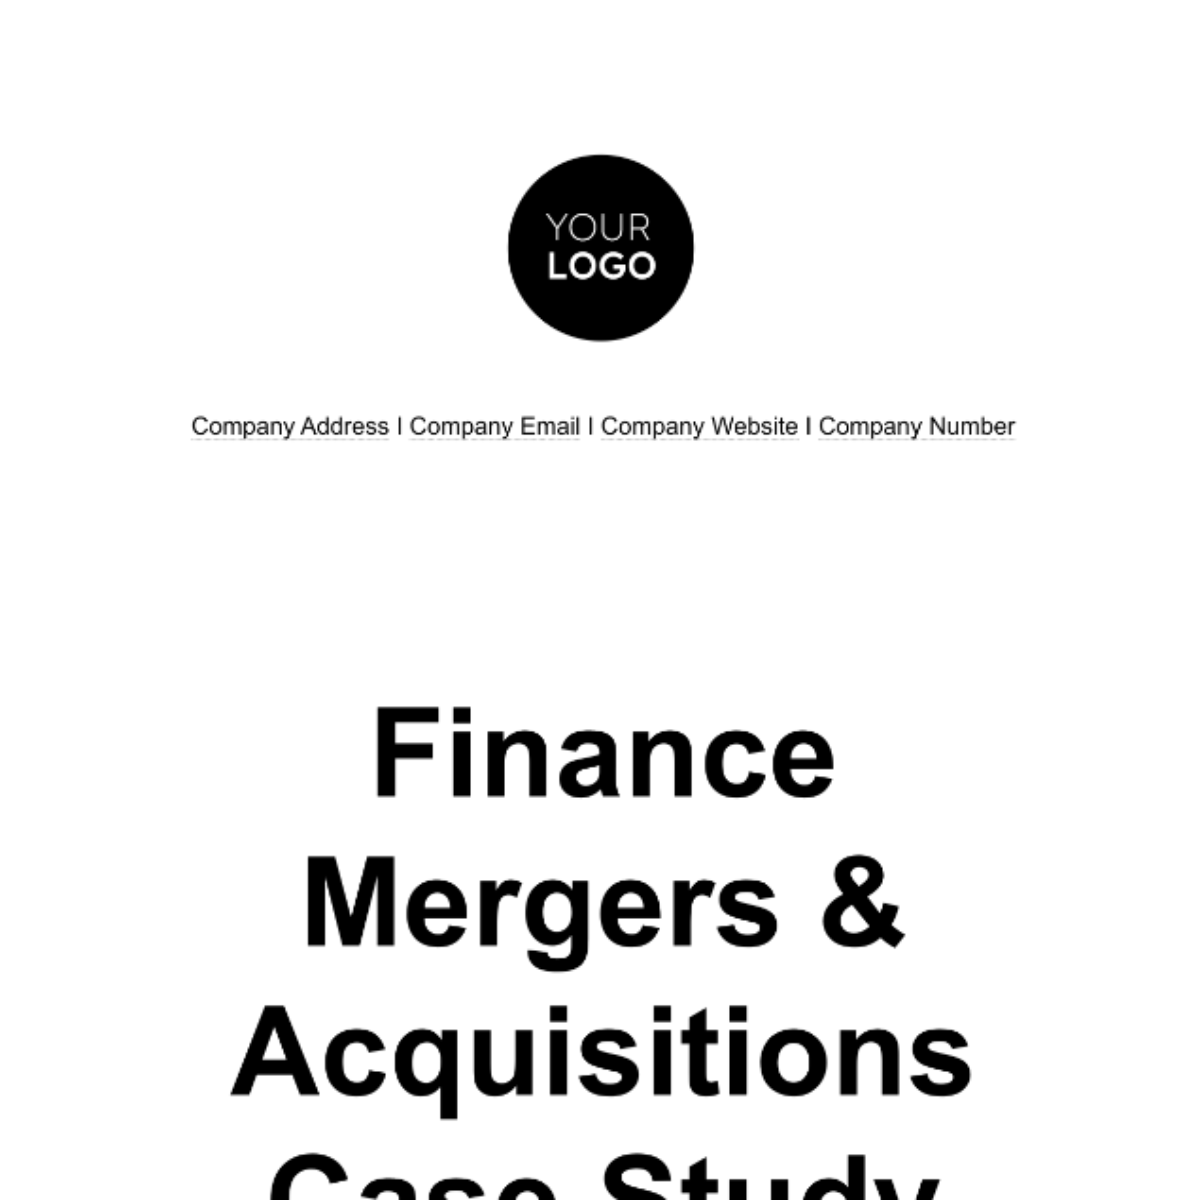 Finance Mergers & Acquisitions Case Study Template